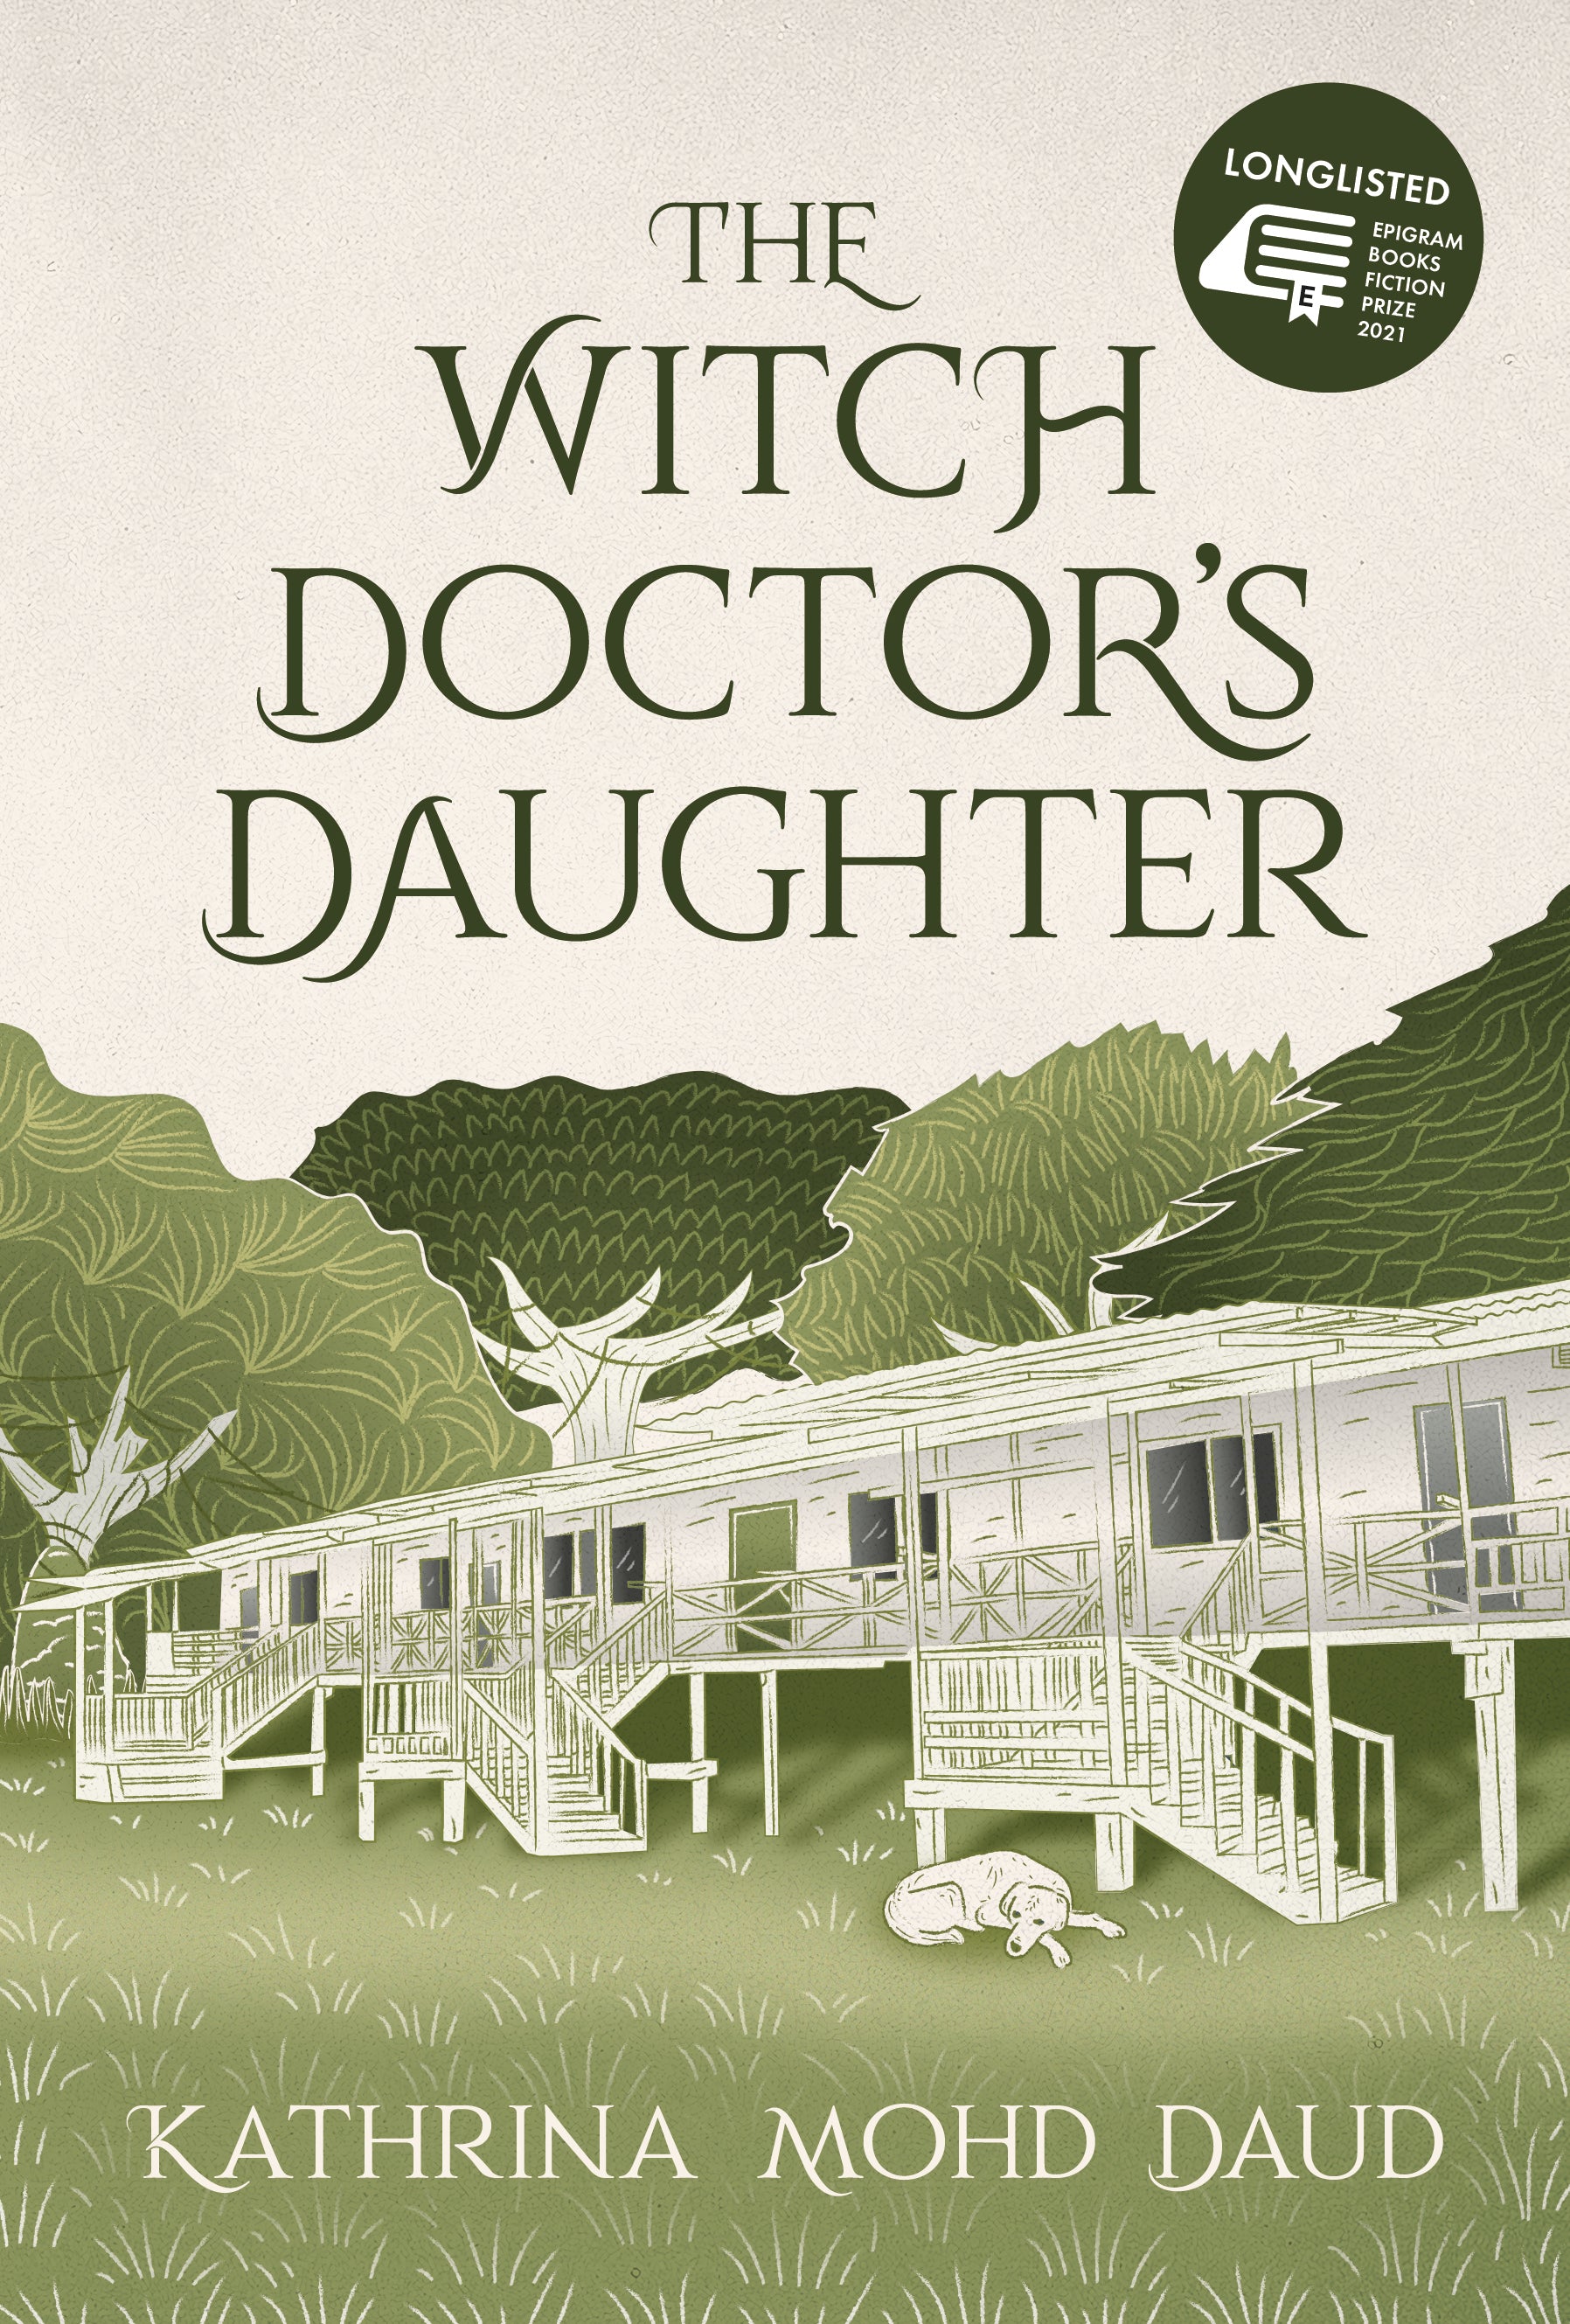 The Witch Doctor's Daughter